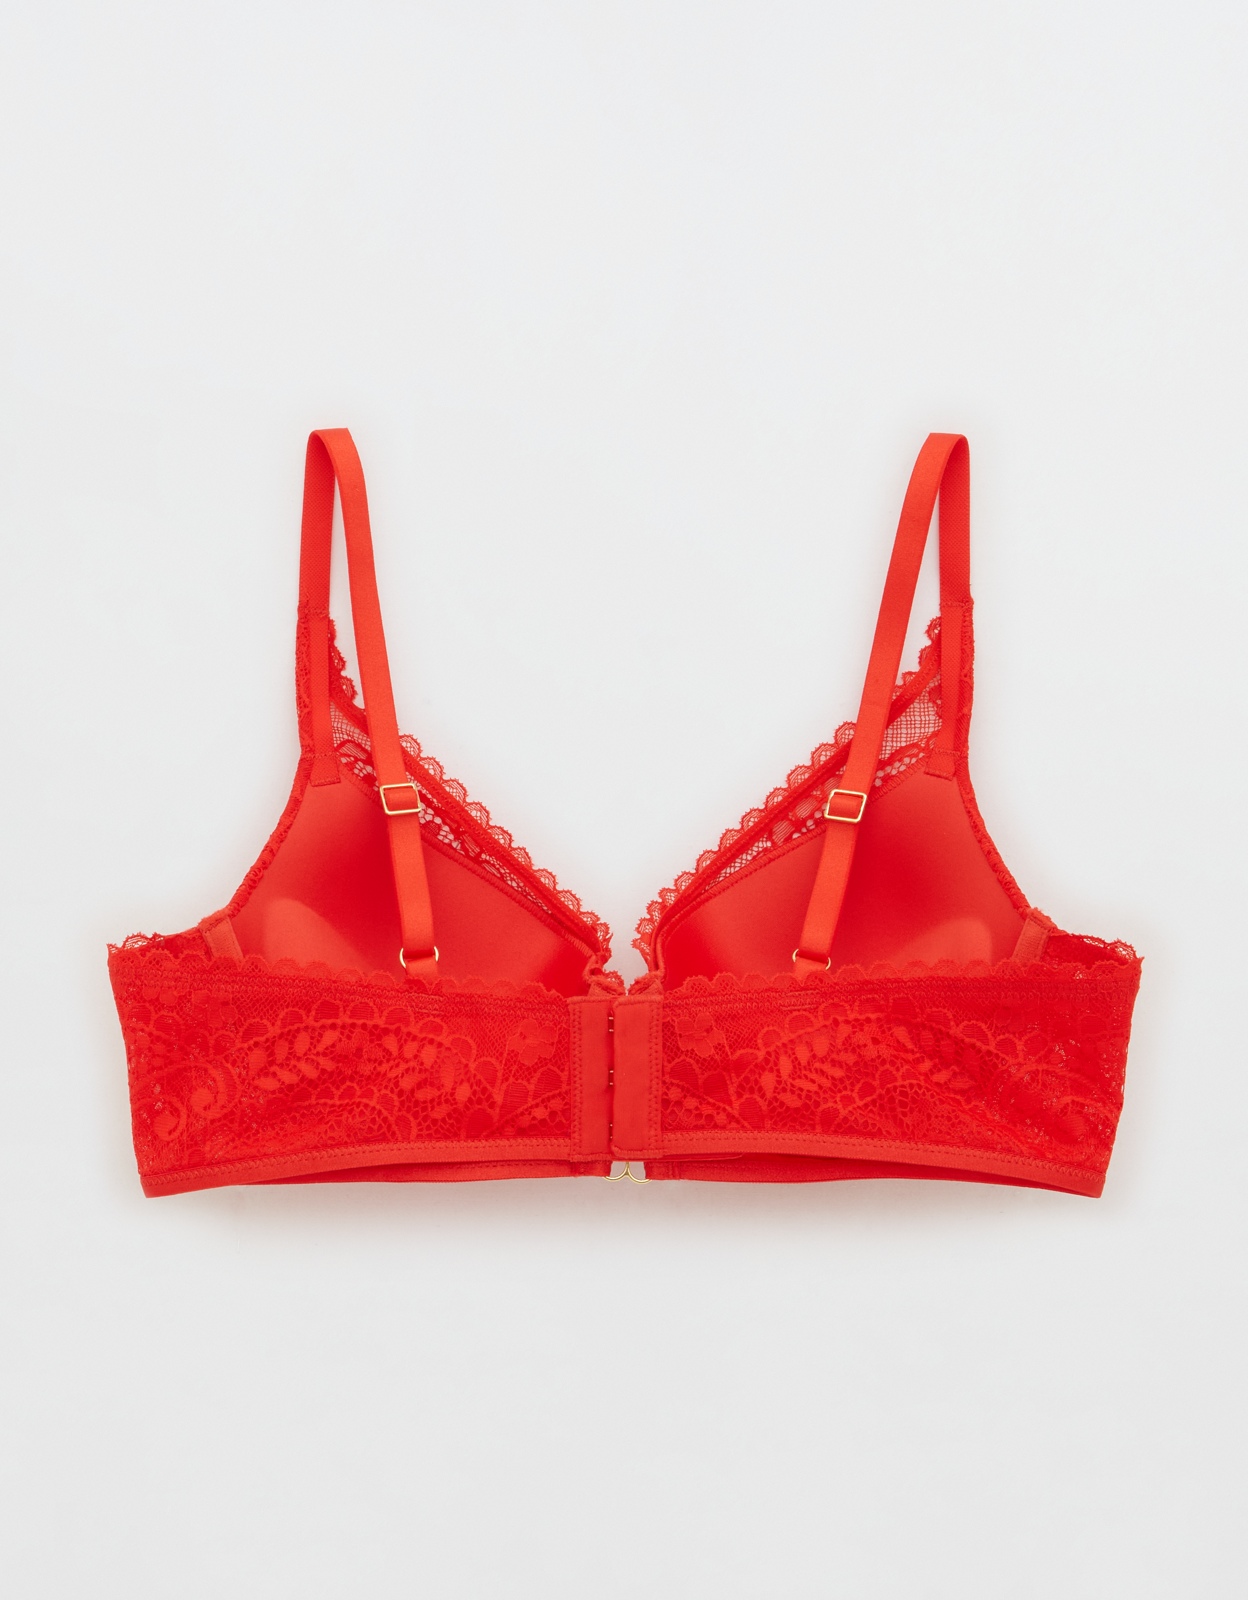 Shop Aerie Real Power Plunge Push Up Paisley Lace Bra online